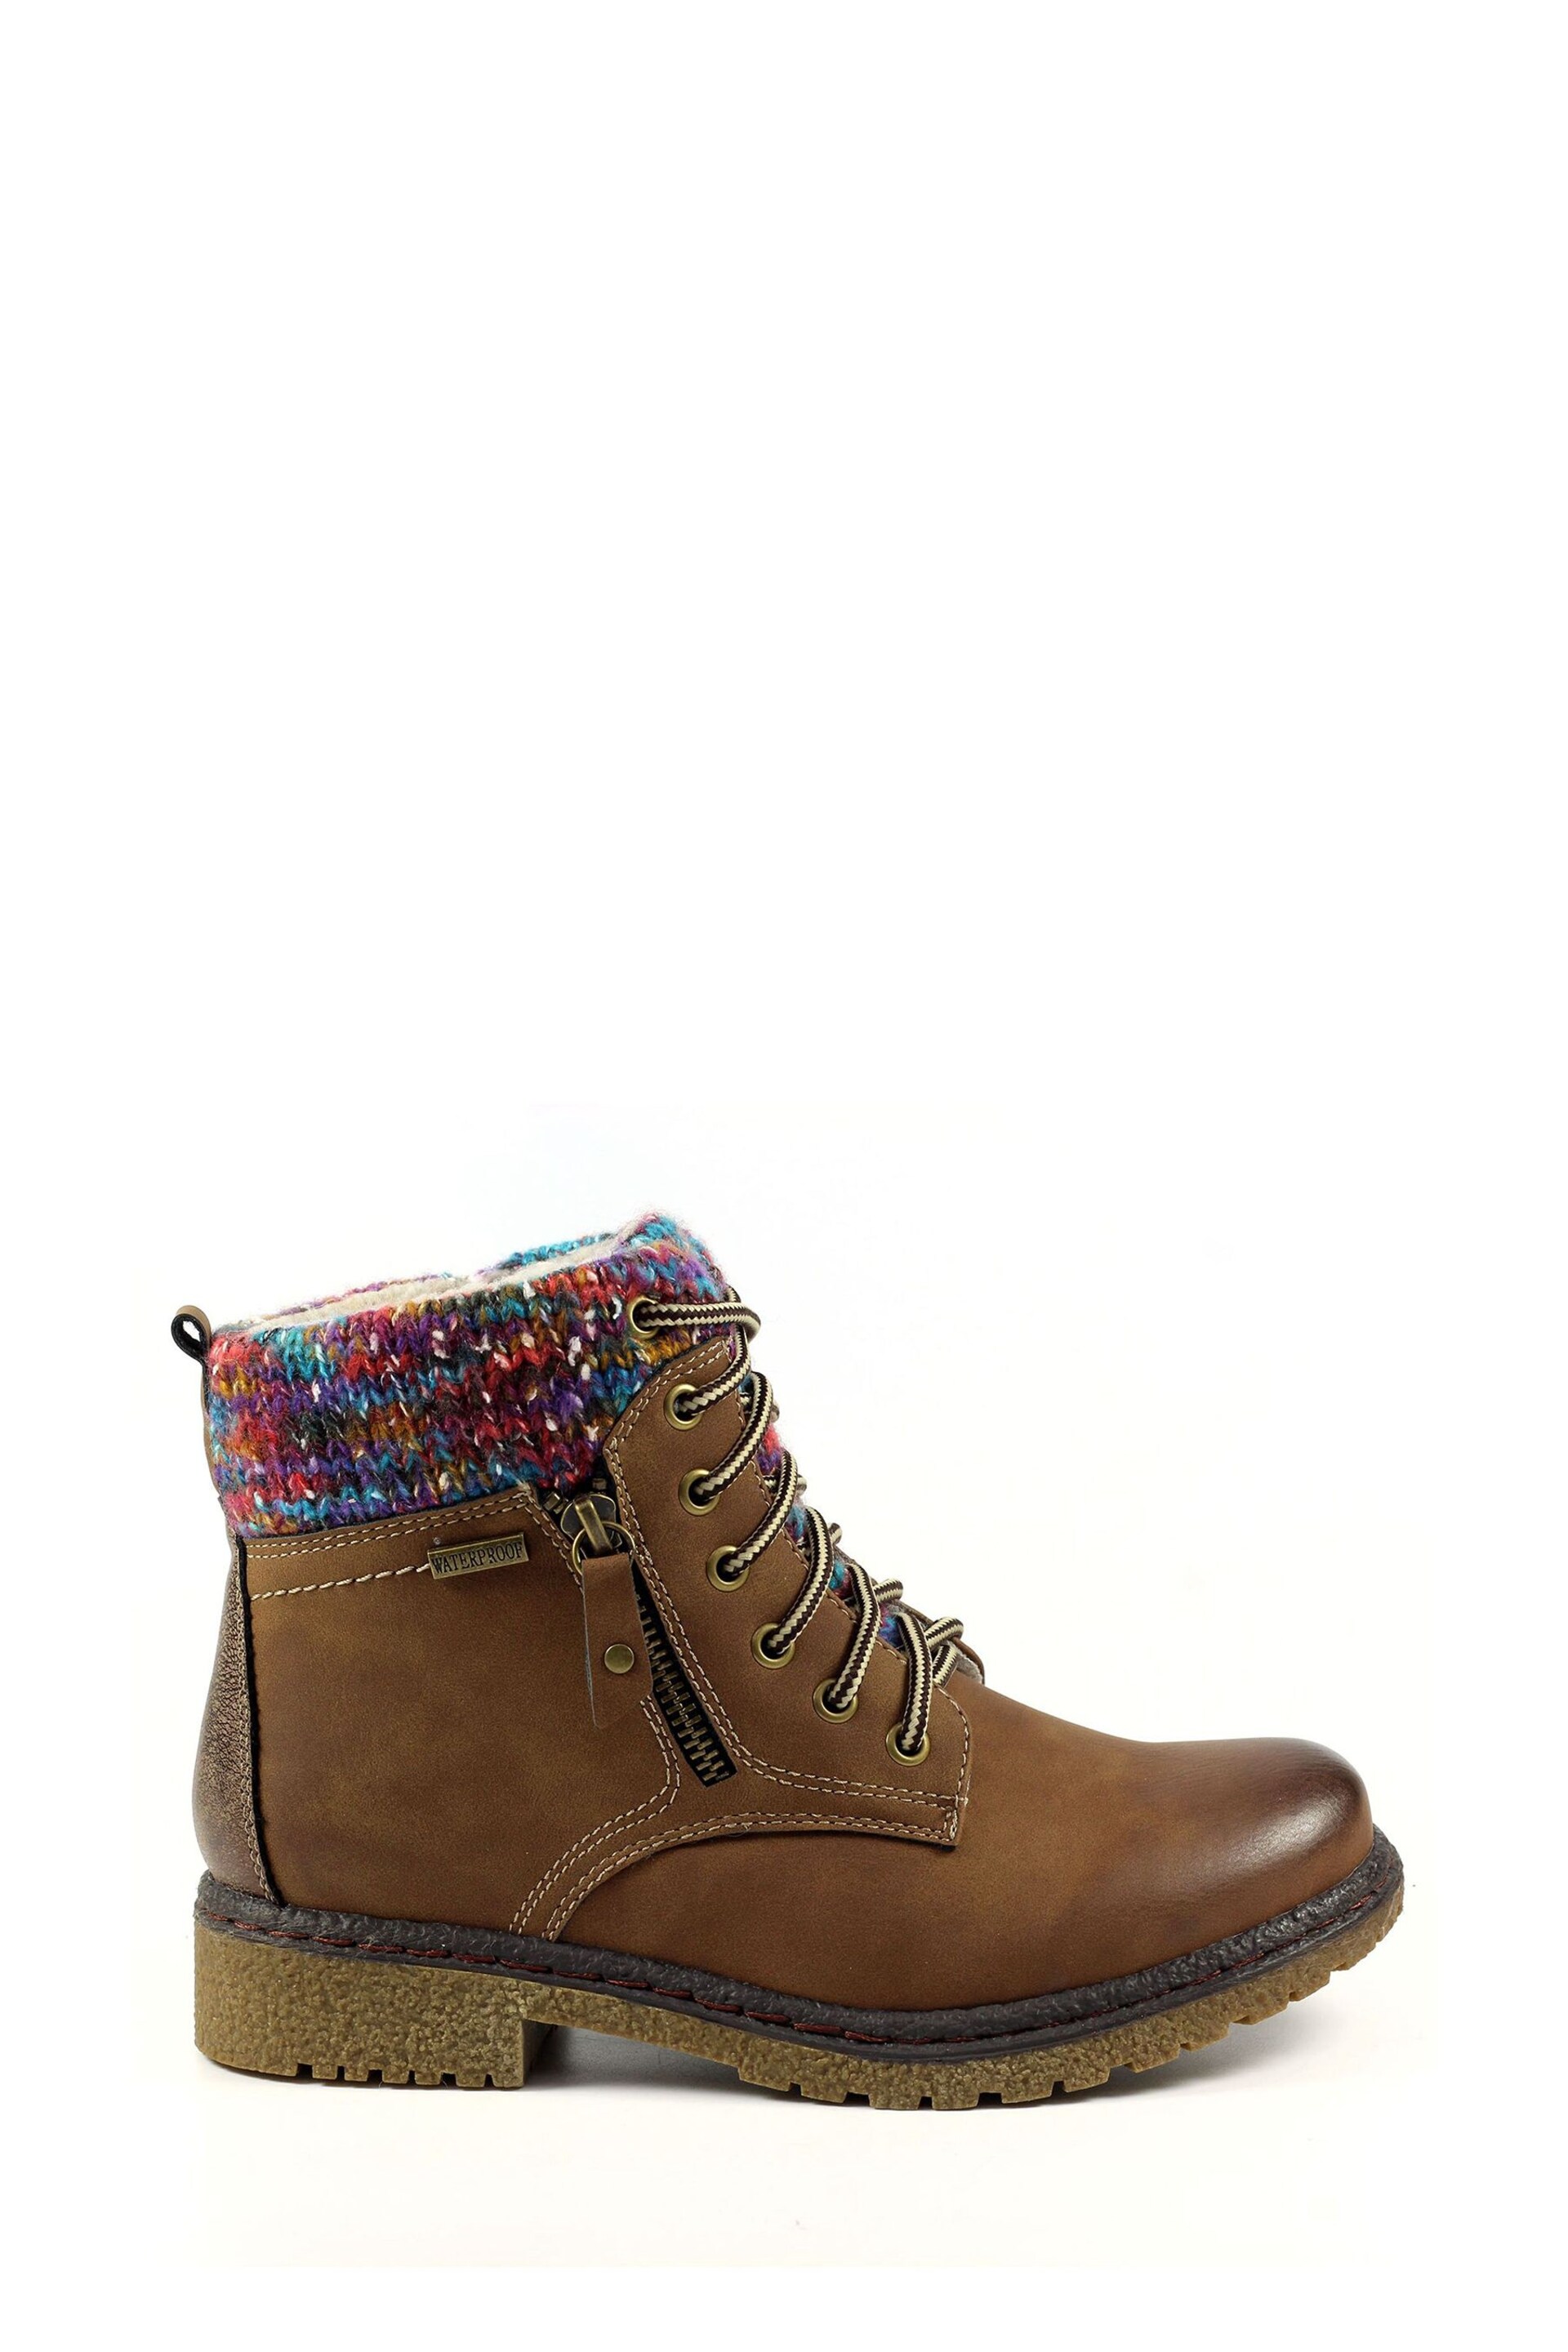 Lunar Jalapeno Waterproof Tan Brown Ankle Boots - Image 1 of 7